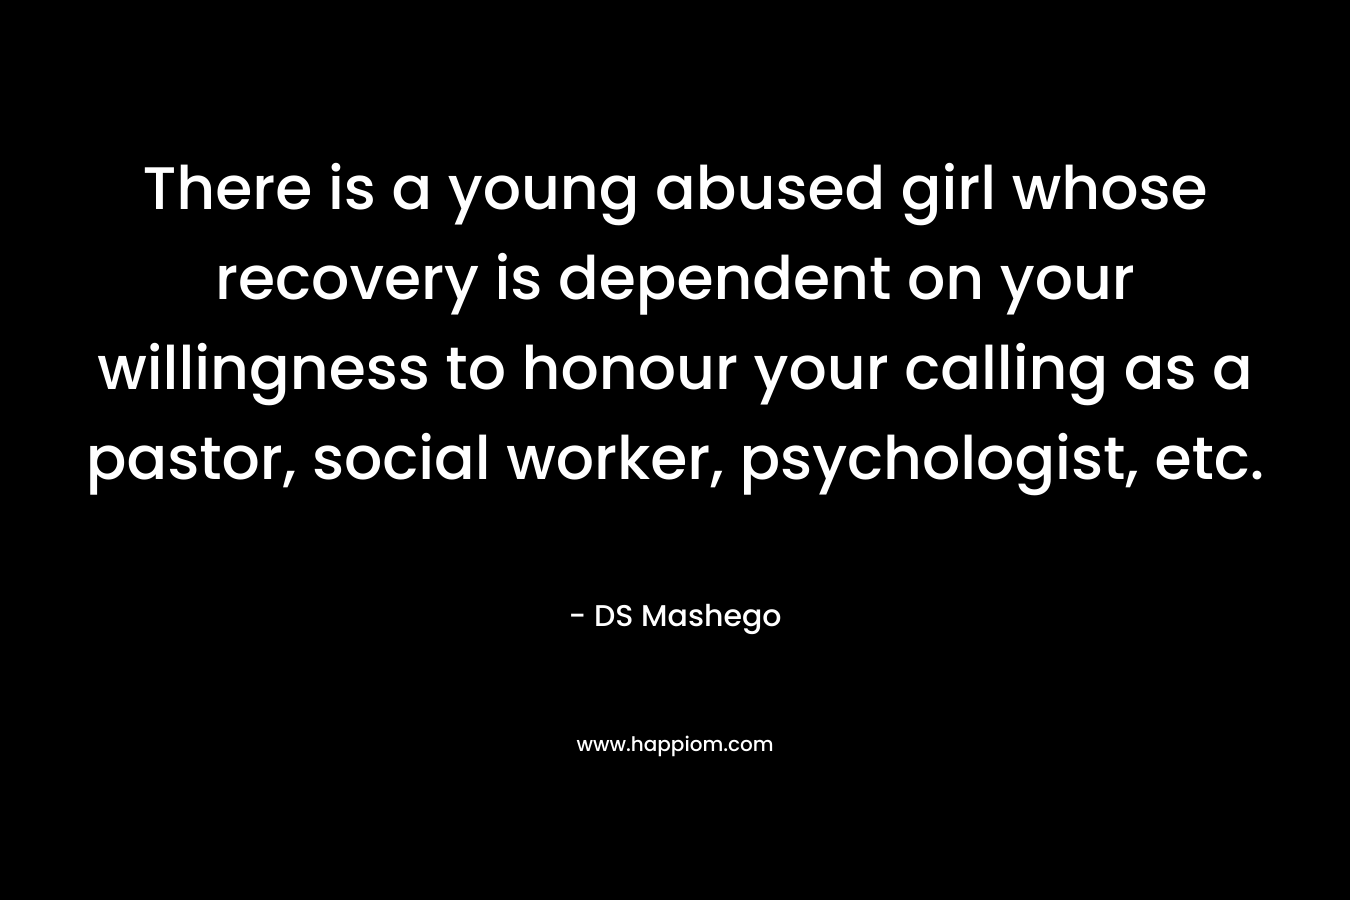 There is a young abused girl whose recovery is dependent on your willingness to honour your calling as a pastor, social worker, psychologist, etc. – DS Mashego